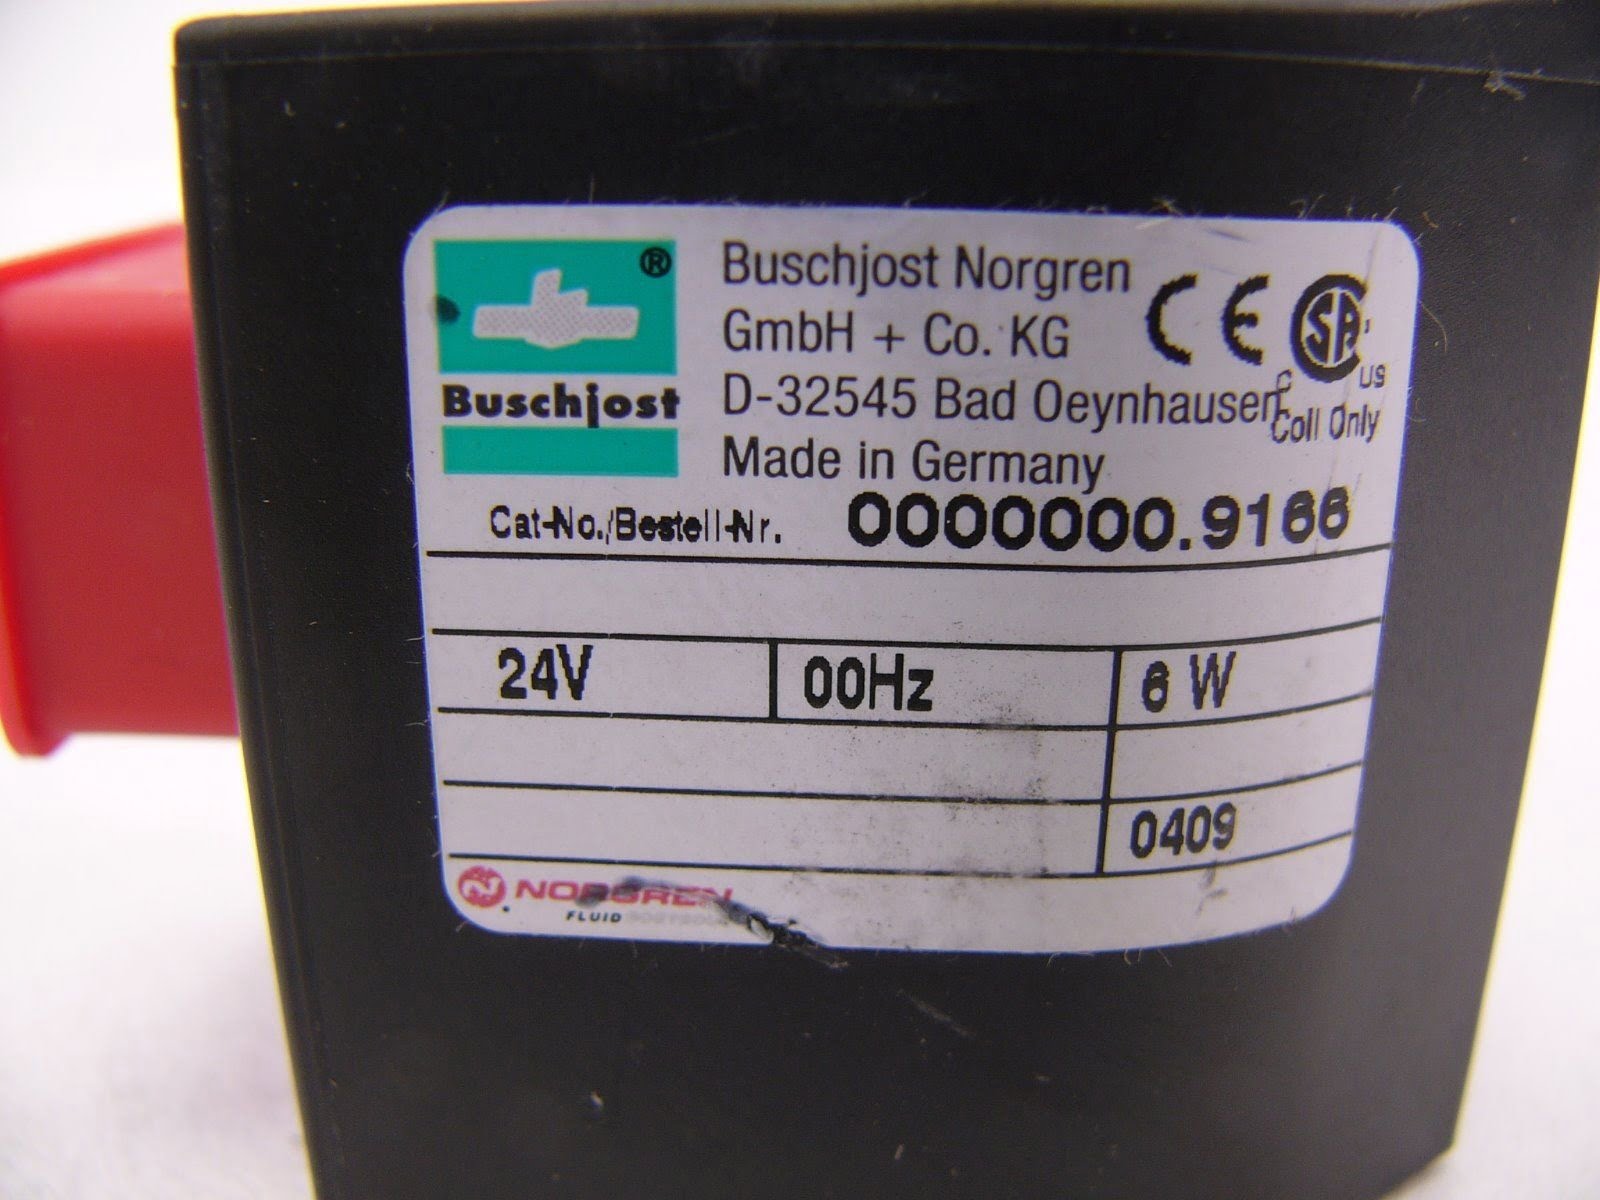 NEW BUSCHJOST 0000000.9100 COIL 24V 00HZ 8W WITH VALVE 8274200.9100 SHIPSAMEDAY 